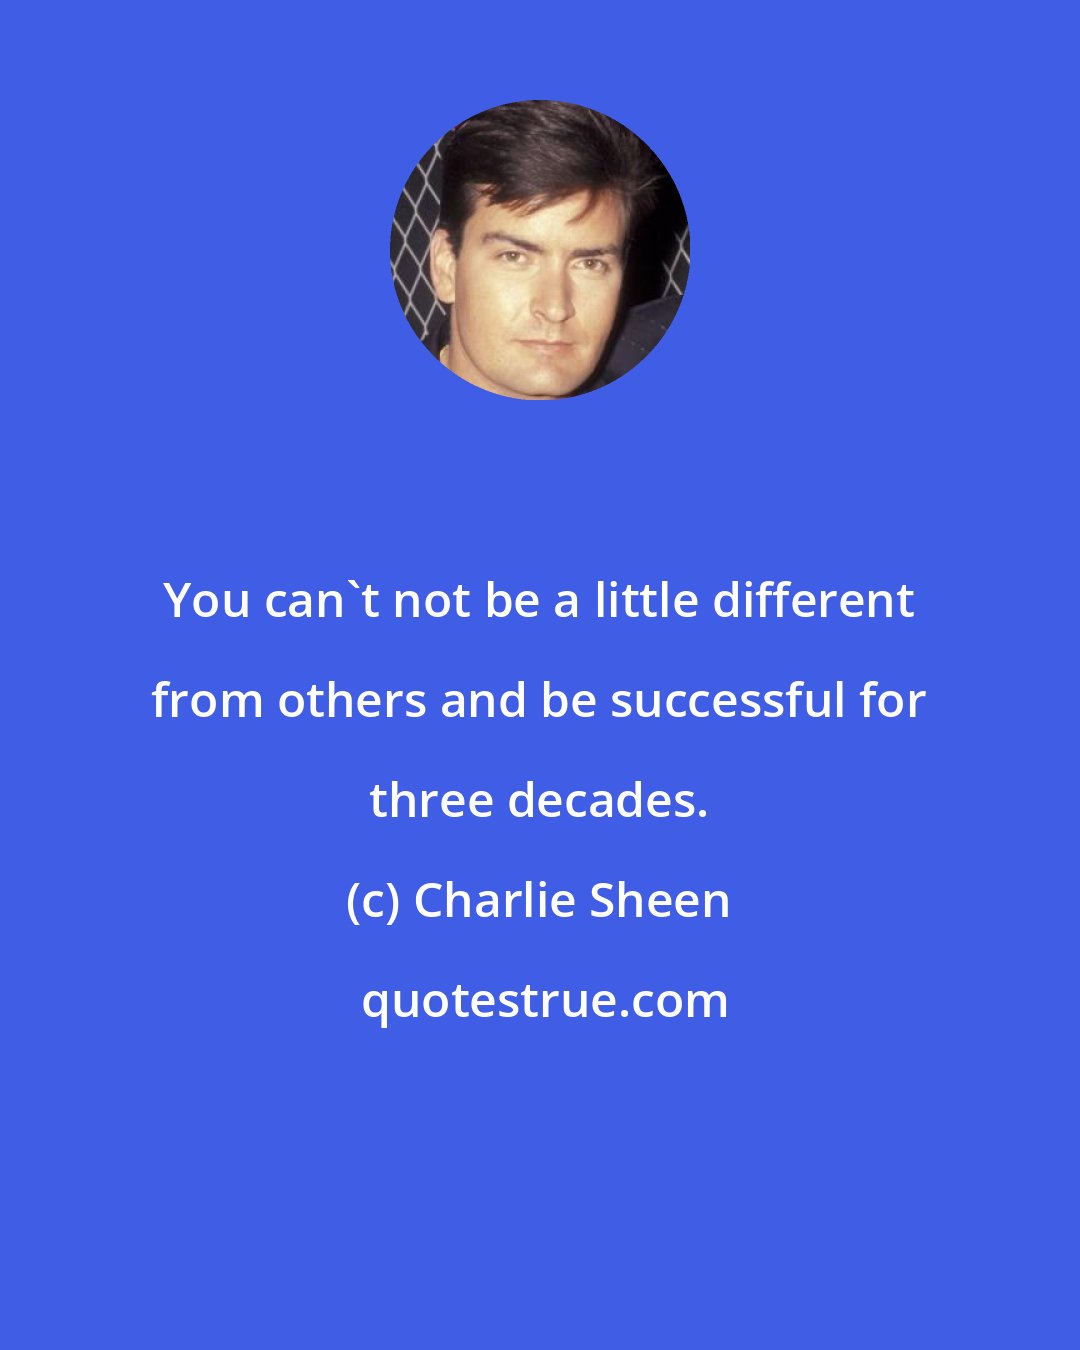 Charlie Sheen: You can't not be a little different from others and be successful for three decades.